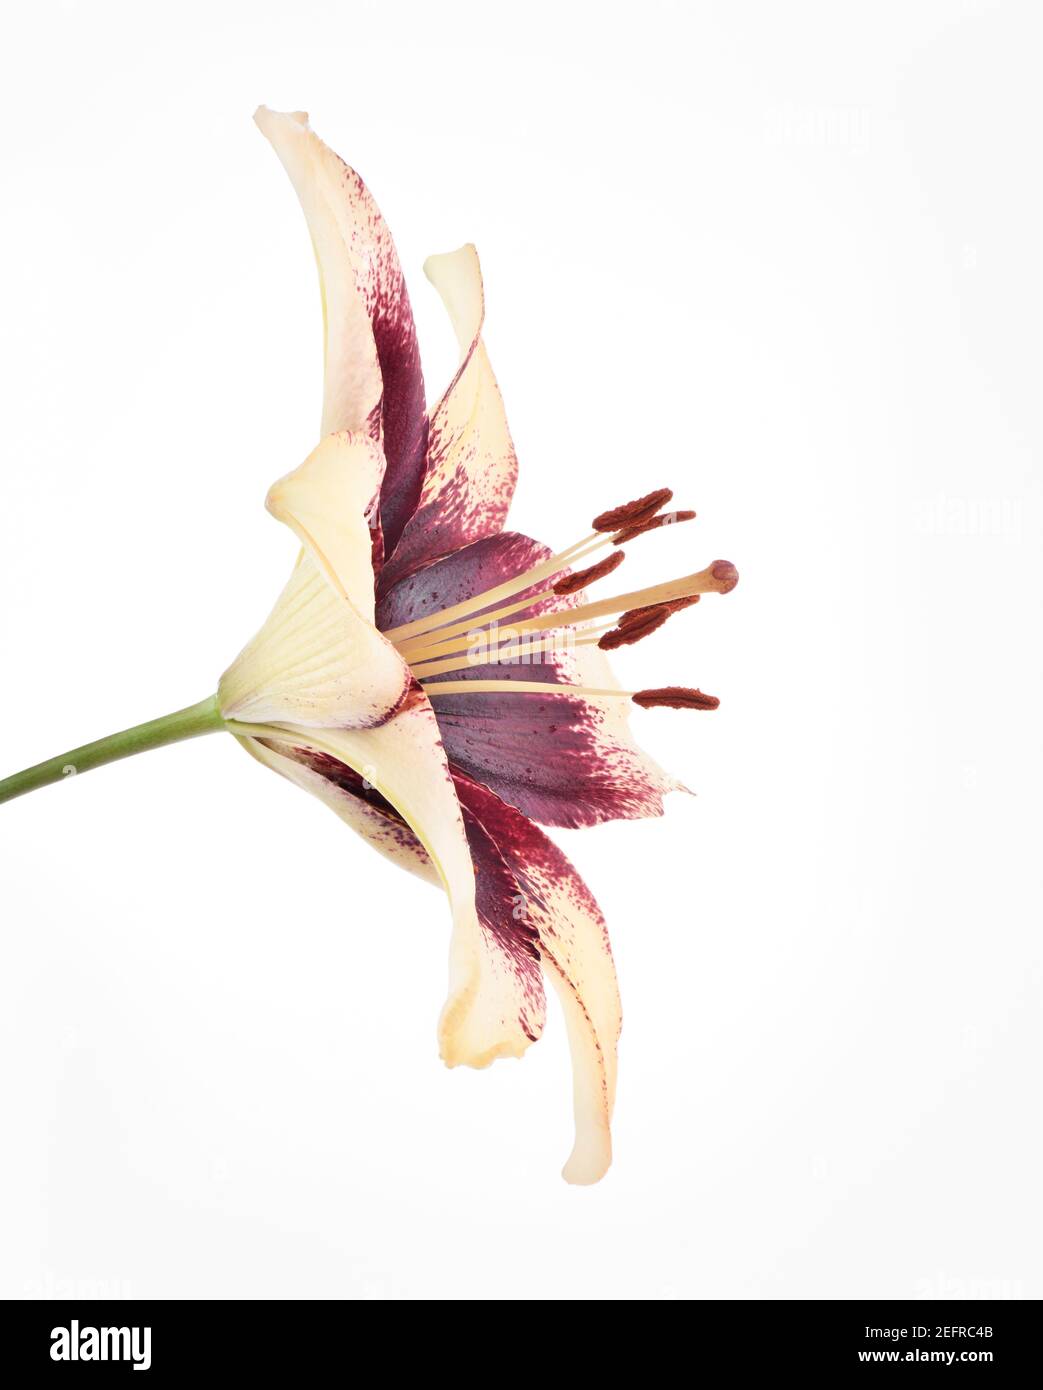 Artistic close-up of Asiatic lily, yellow, purple, red flower, side view isolated on white studio background. Stock Photo